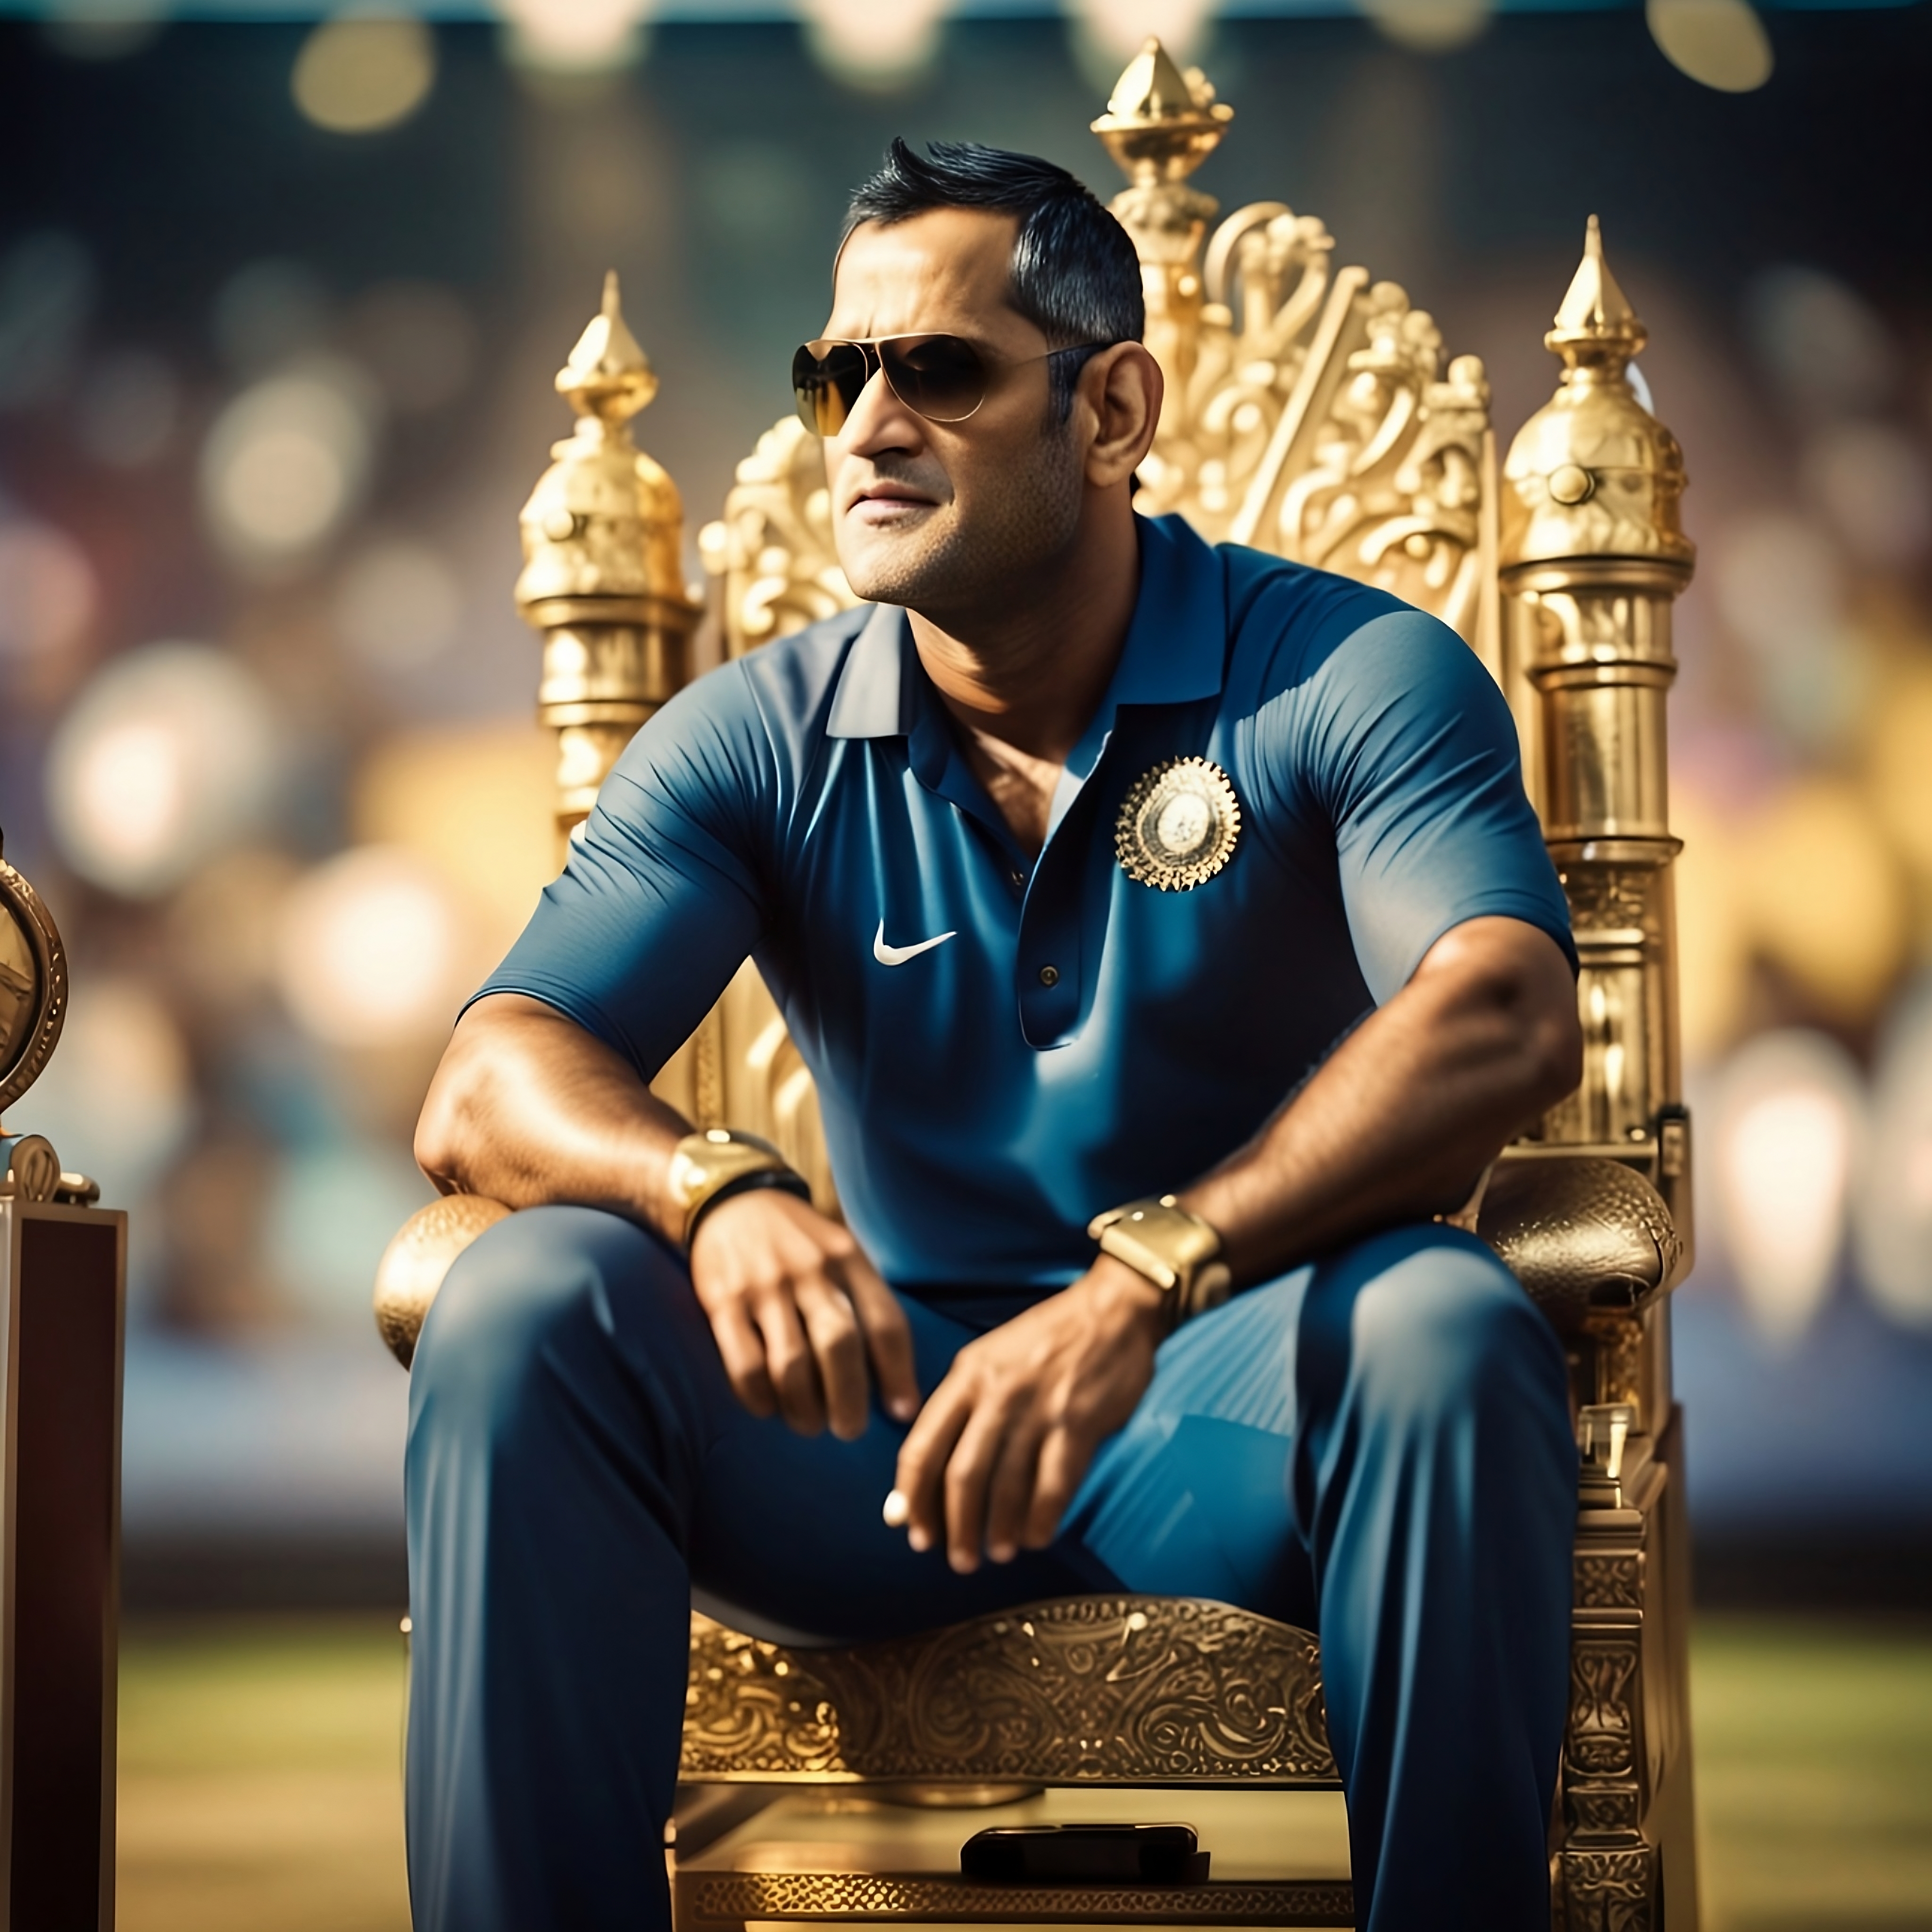 MS Dhoni Hd Wallpaper By Ai Msd Sat On a Gold Throne In Hd Quality Download For Free